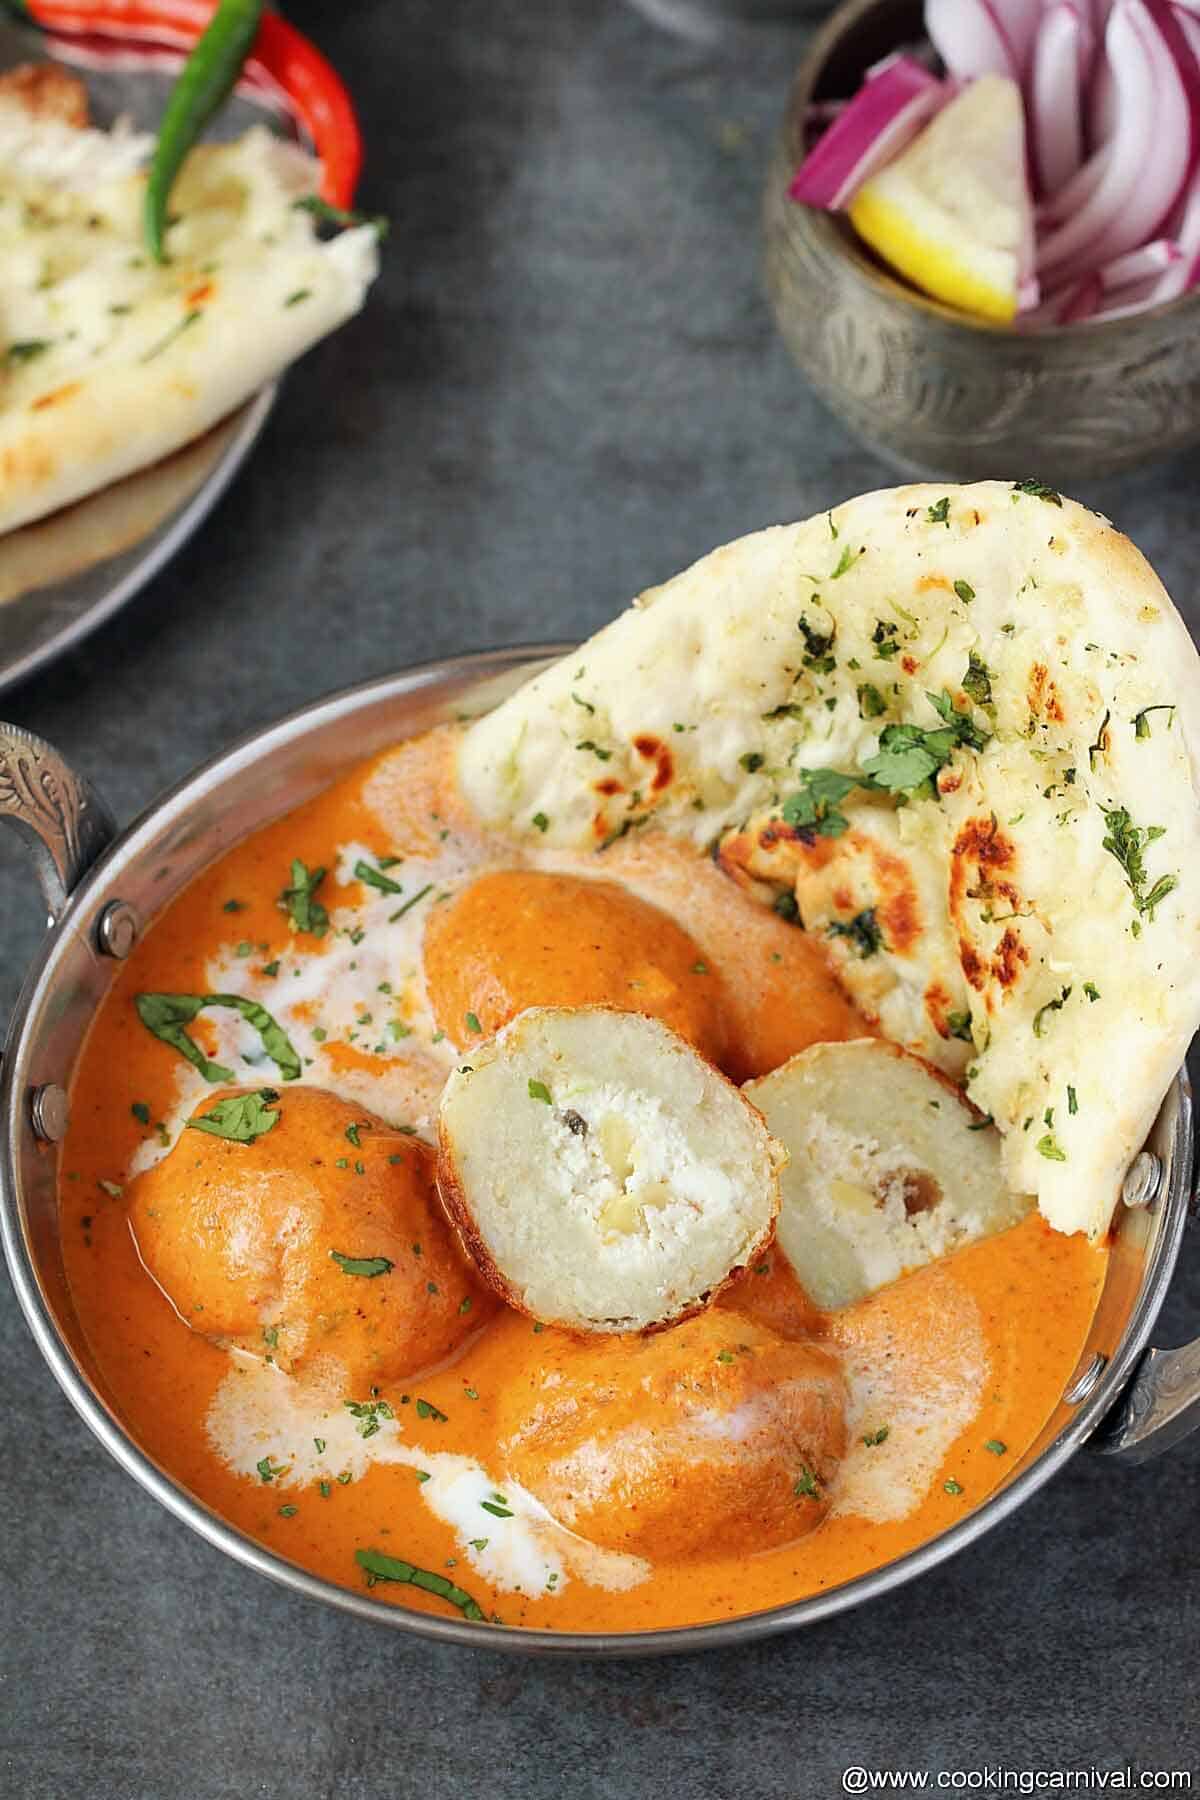 Potato balls dunked in tomato onion based silky gravy, served in steel bowl with naan